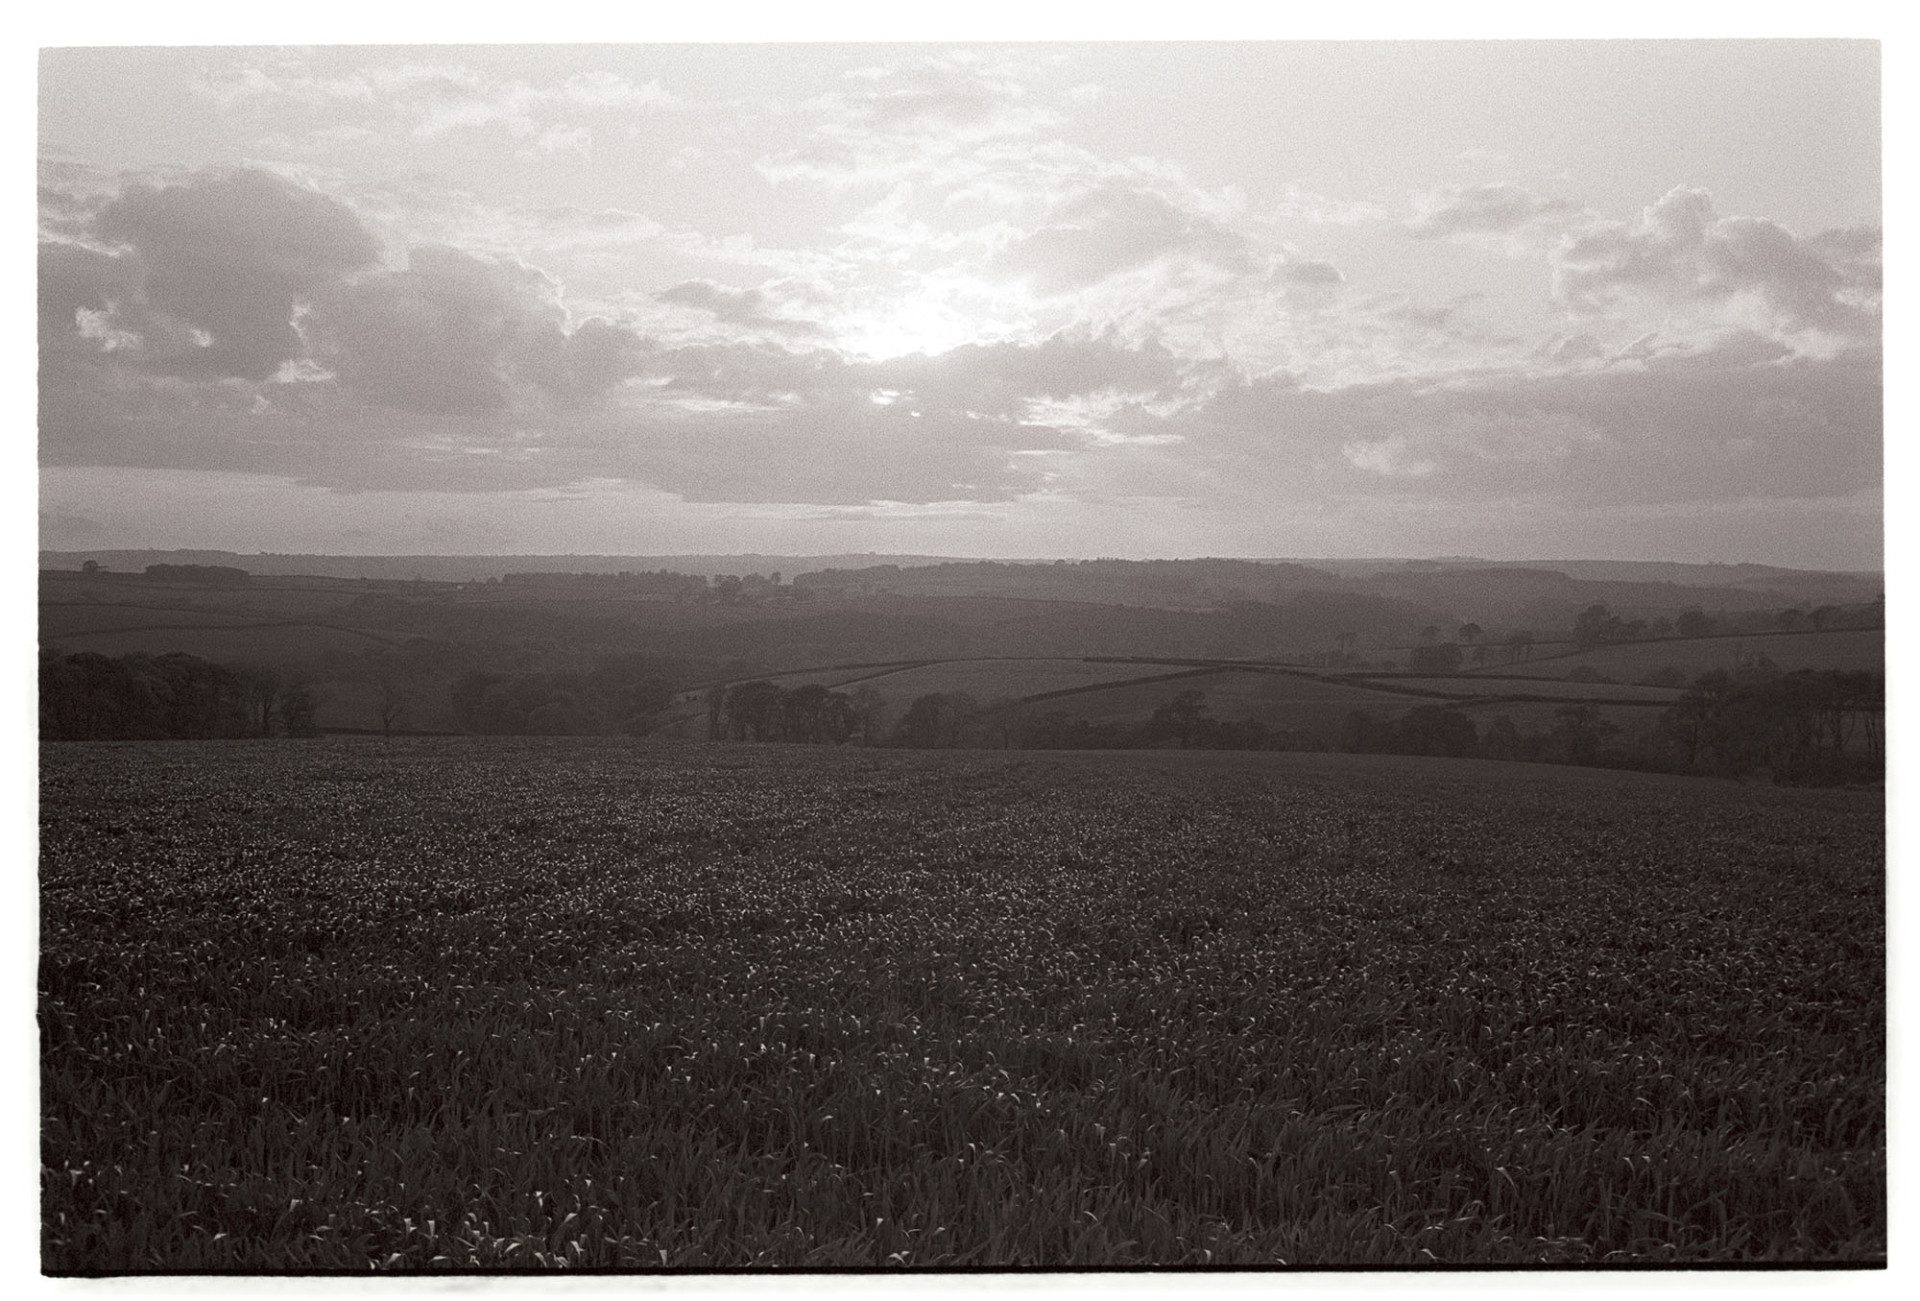 Landscape with tree against light, crop in field. 
[The landscape at Brimblecombe, Dowland, with trees and fields in the background and a crop in the foreground. The sun is behind clouds in the sky above.]